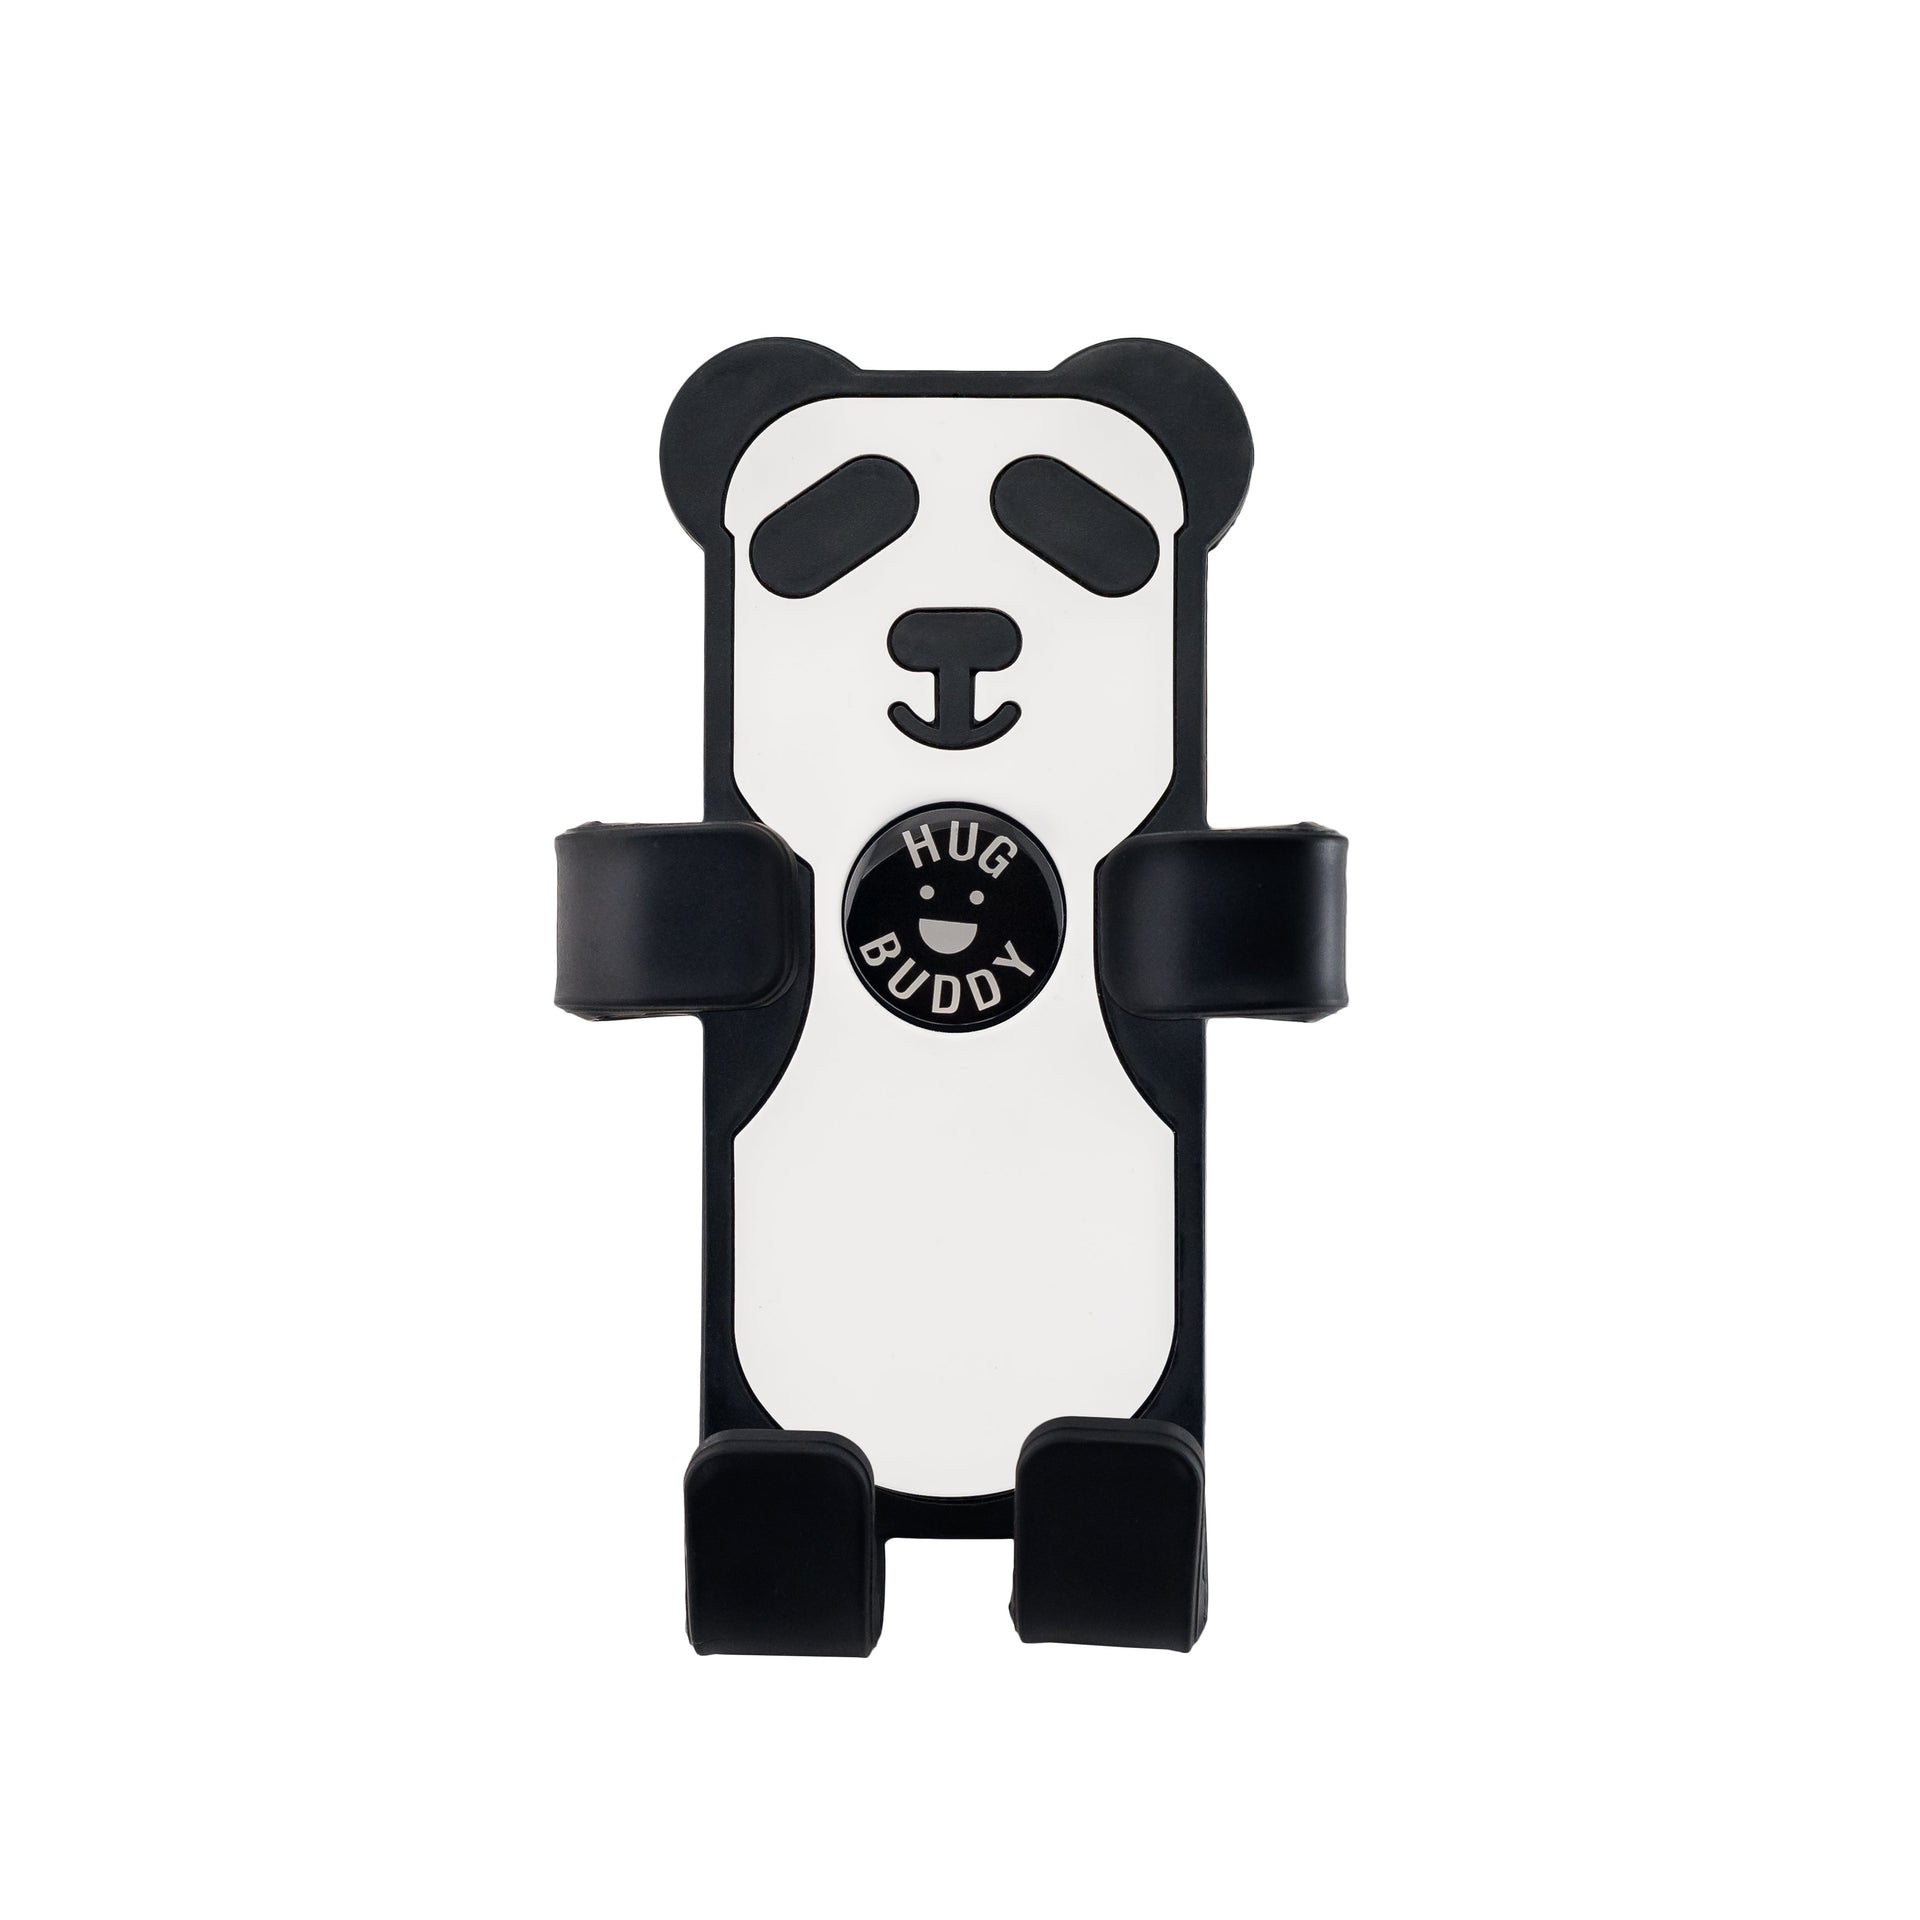 Image of Panda Hug Buddy on a white background with its arms and legs folded inward, ready to hold a phone or smart device.